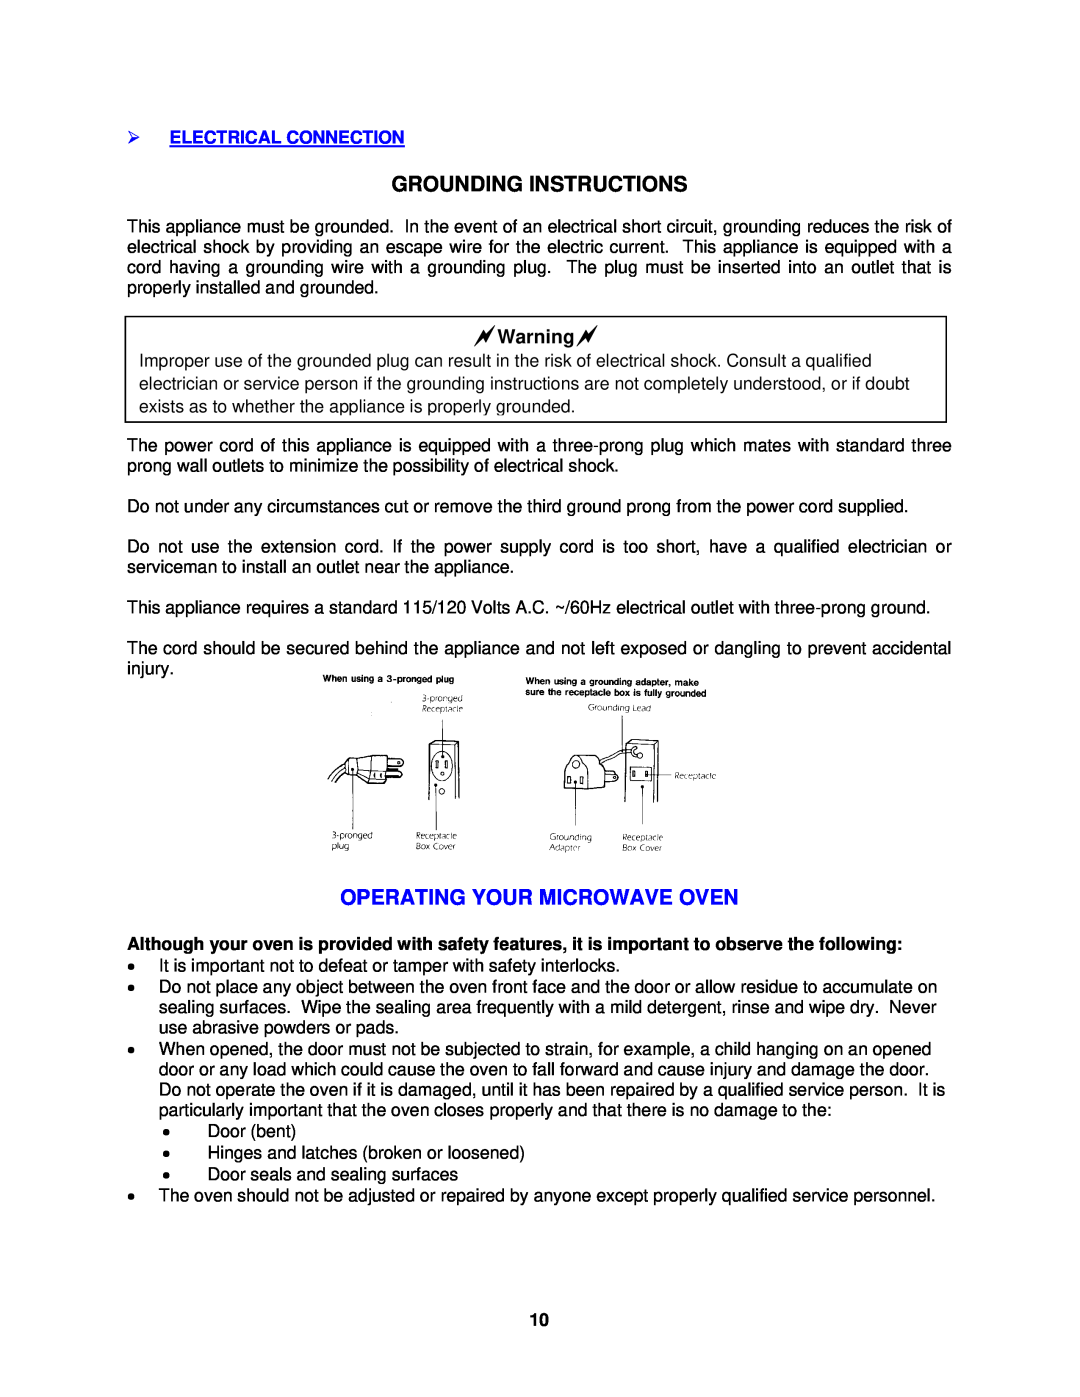 Avanti MO7082MB, MO9003SST Grounding Instructions, Operating Your Microwave Oven, Warning, Electrical Connection 